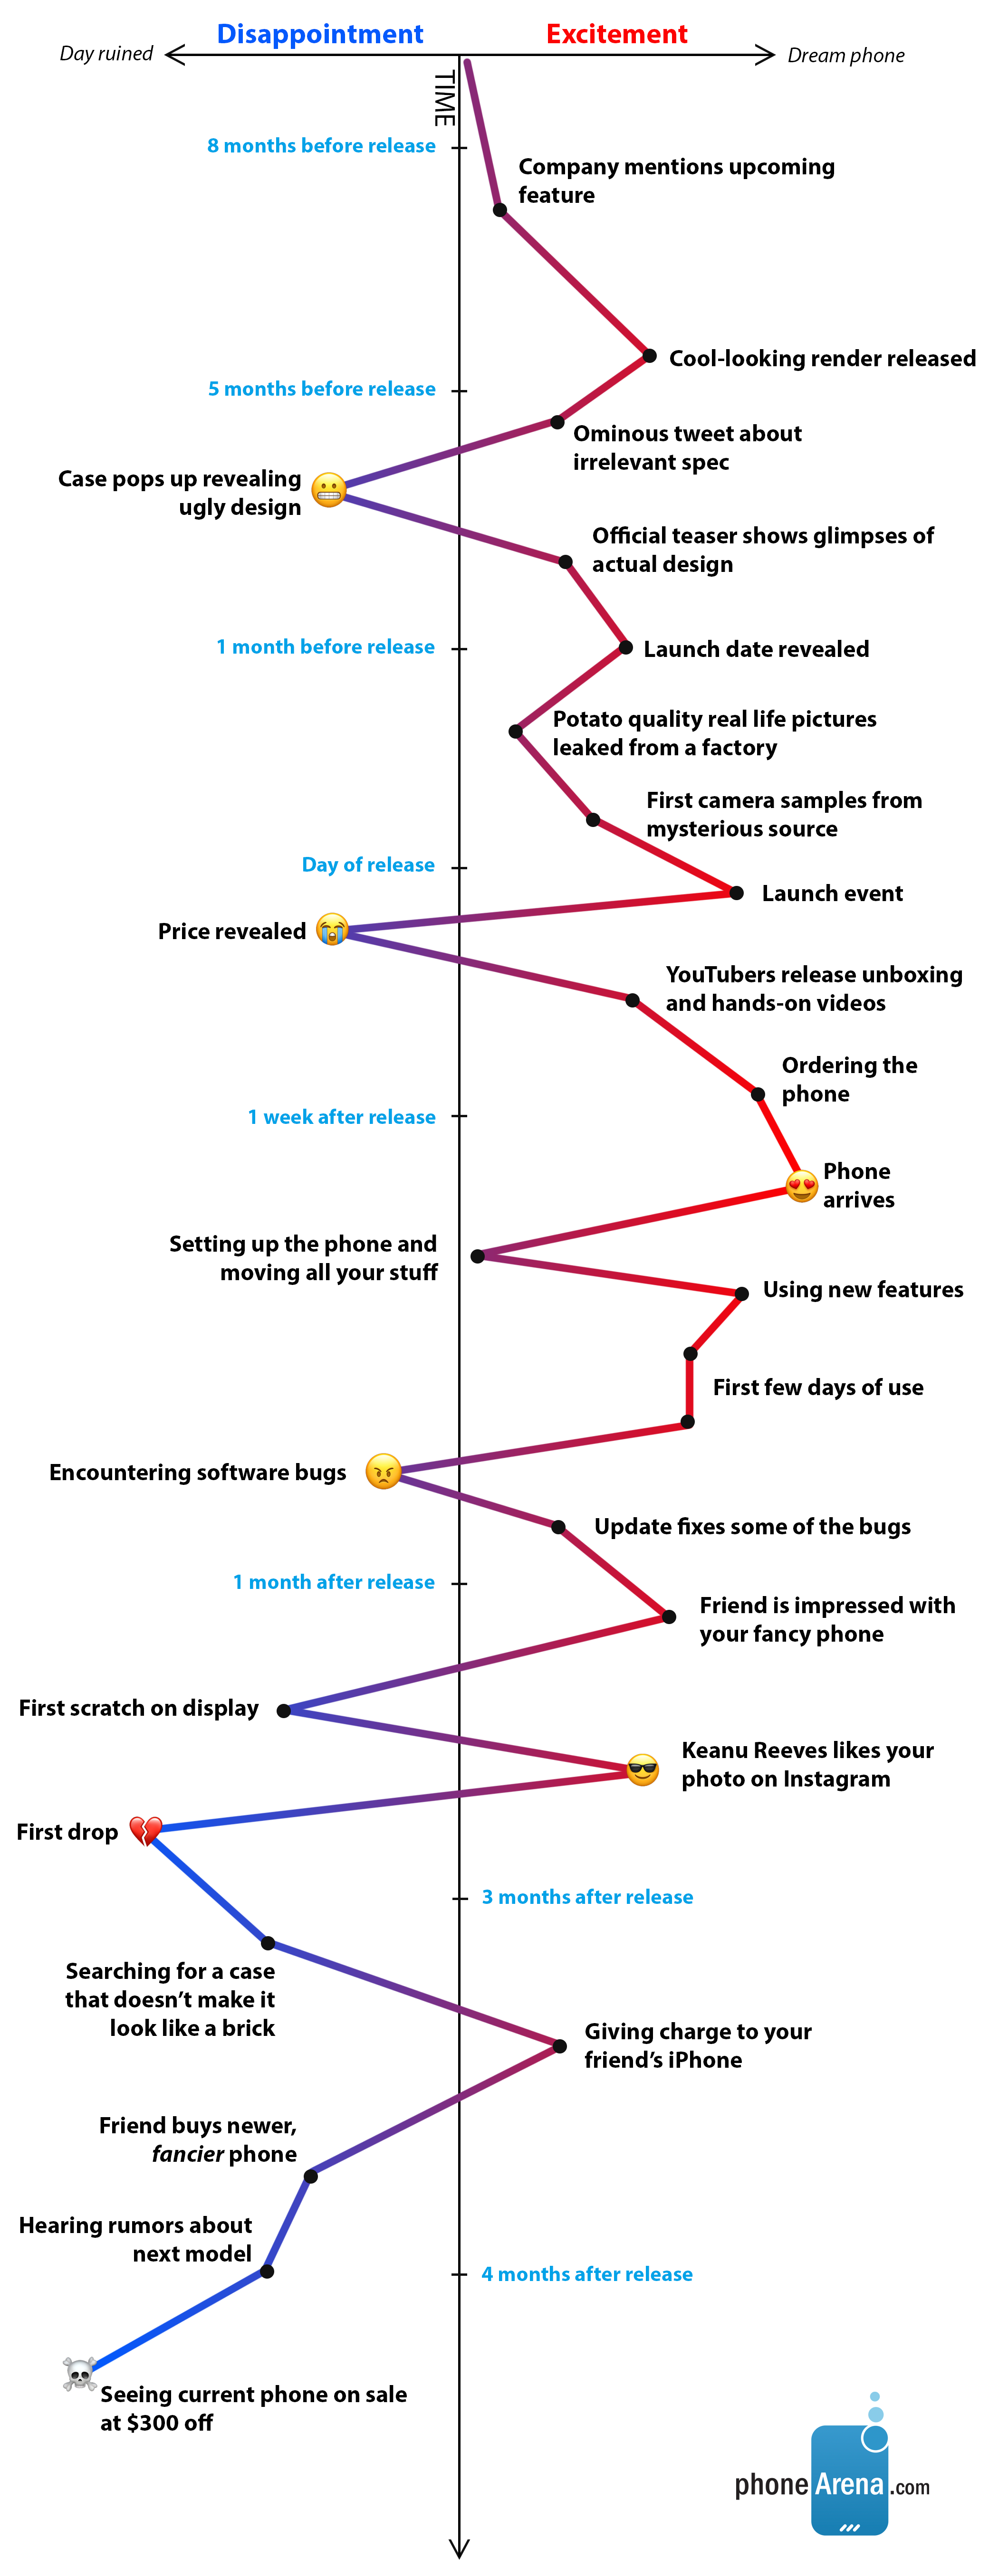 The joys and perils of looking for the perfect phone: an emotional graph